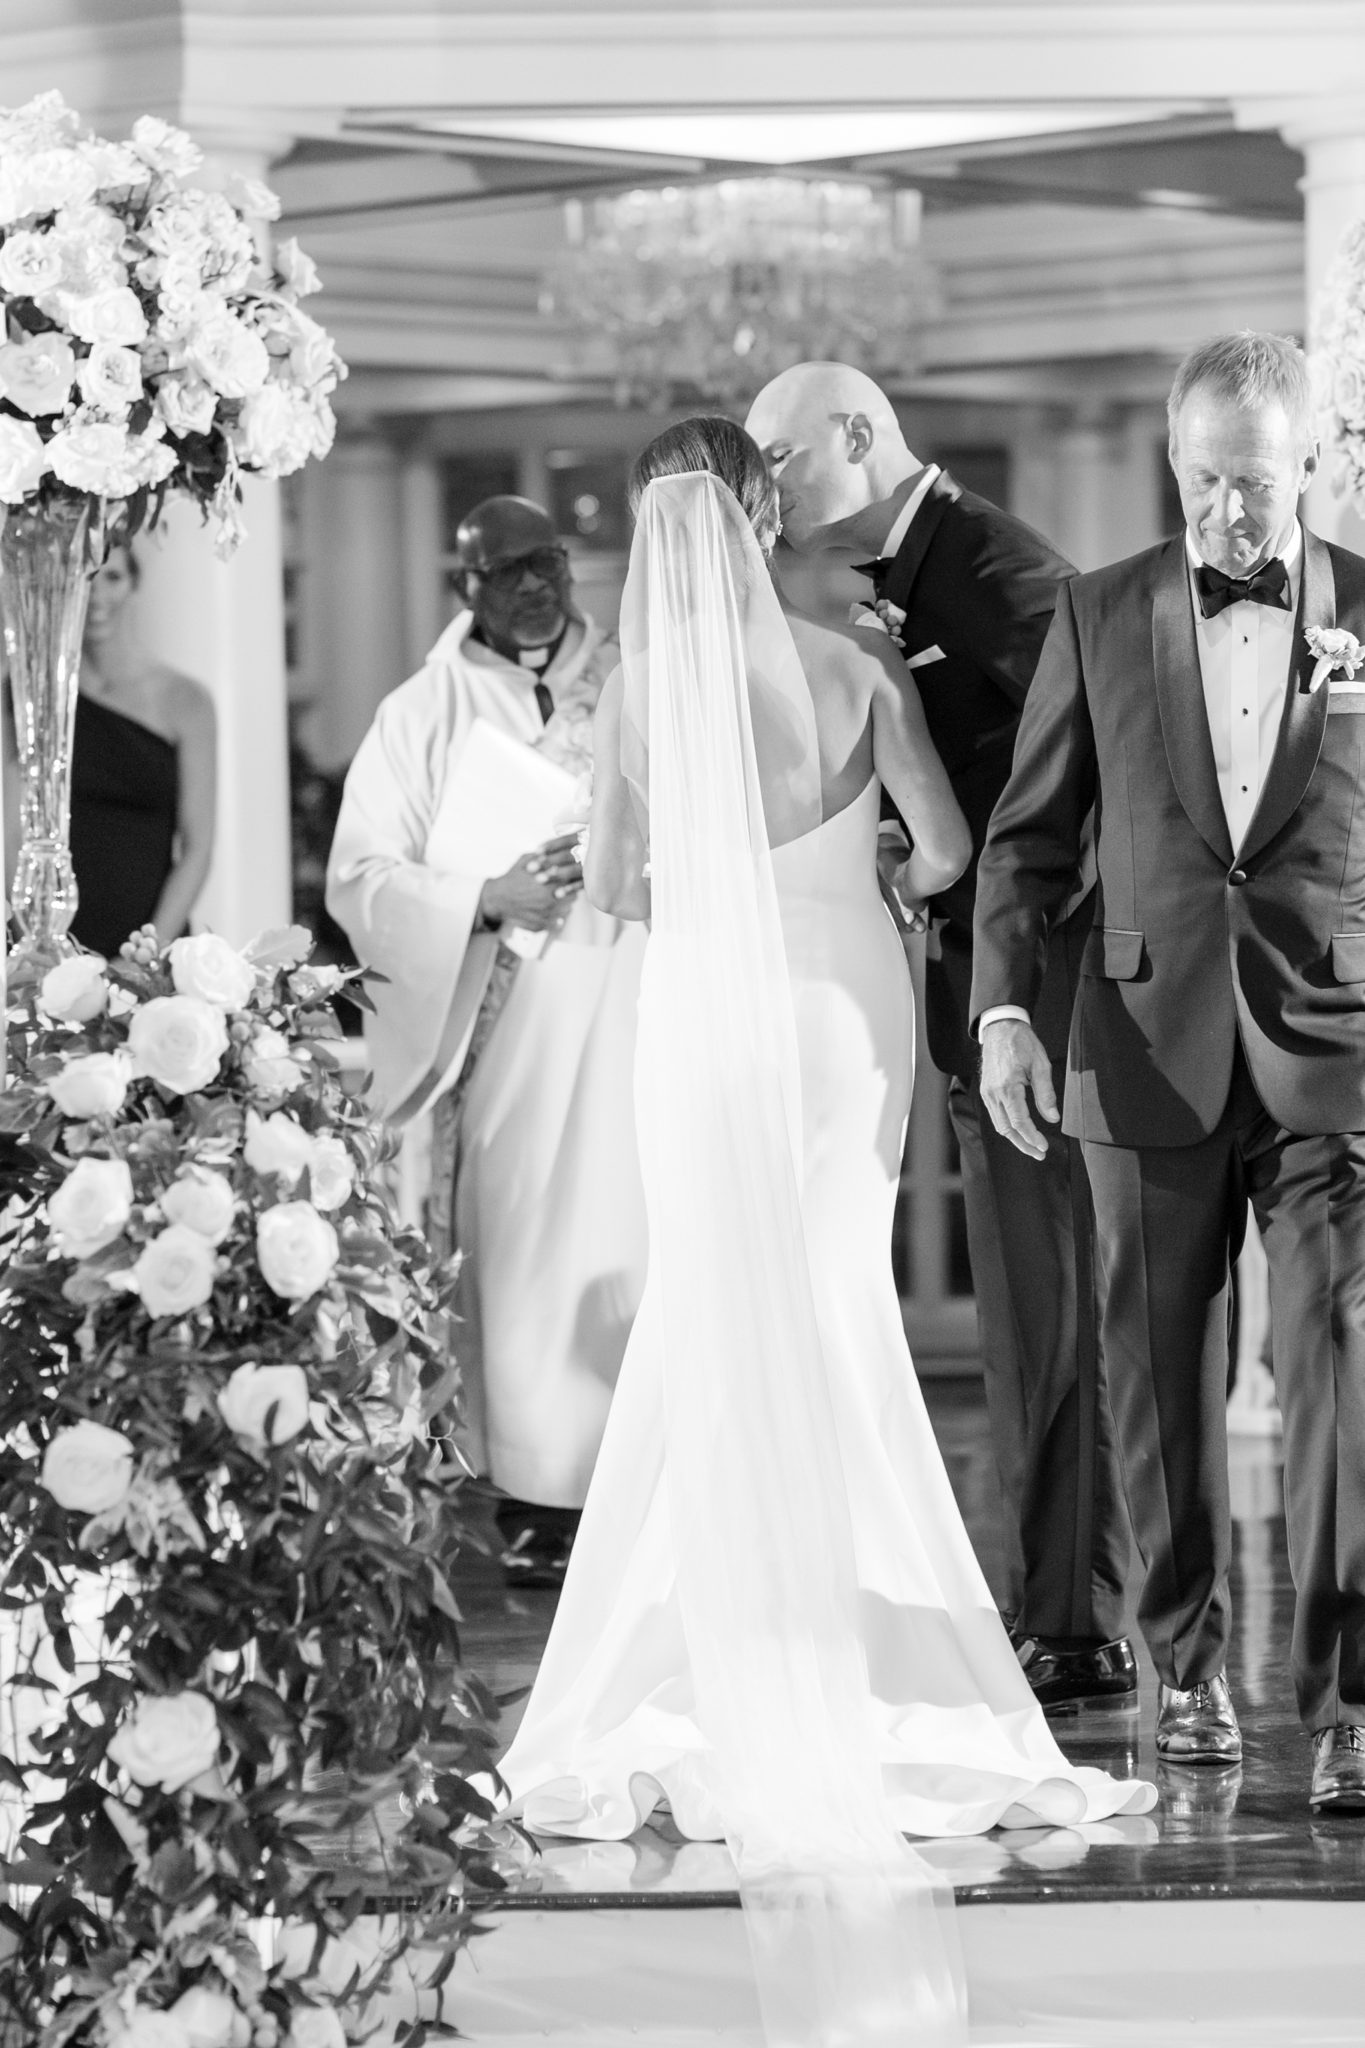 An elegant December wedding at the Fairmont Hotel in Washington, DC designed by EVOKE with florals by Amaryllis. 